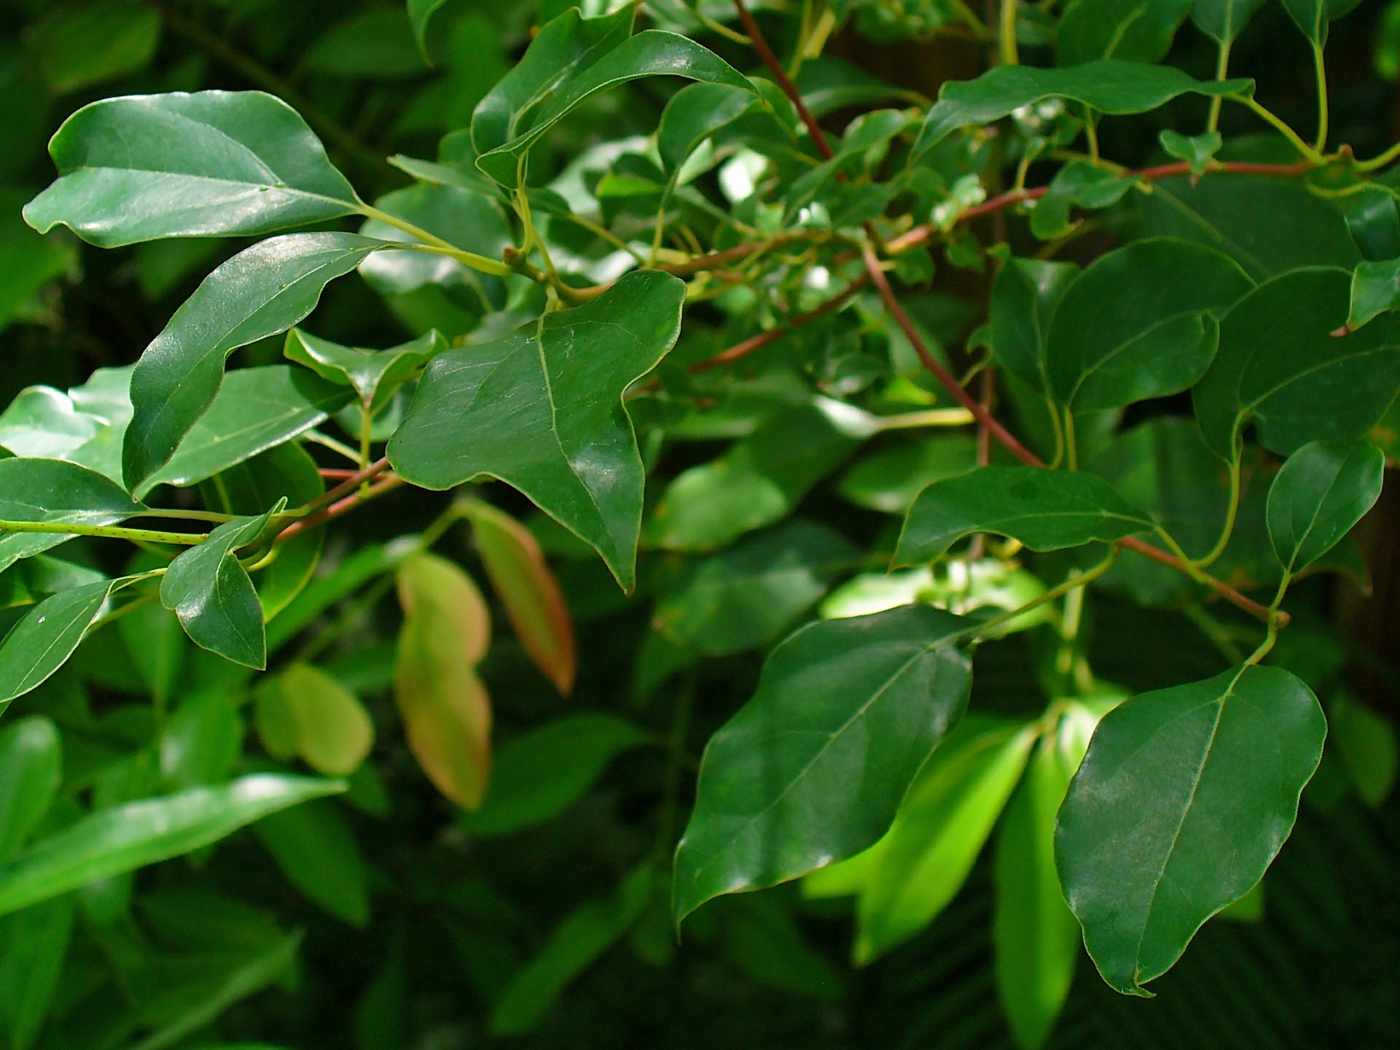 The camphor tree (Cinnamomum camphora) sheds flies and other insects in the garden